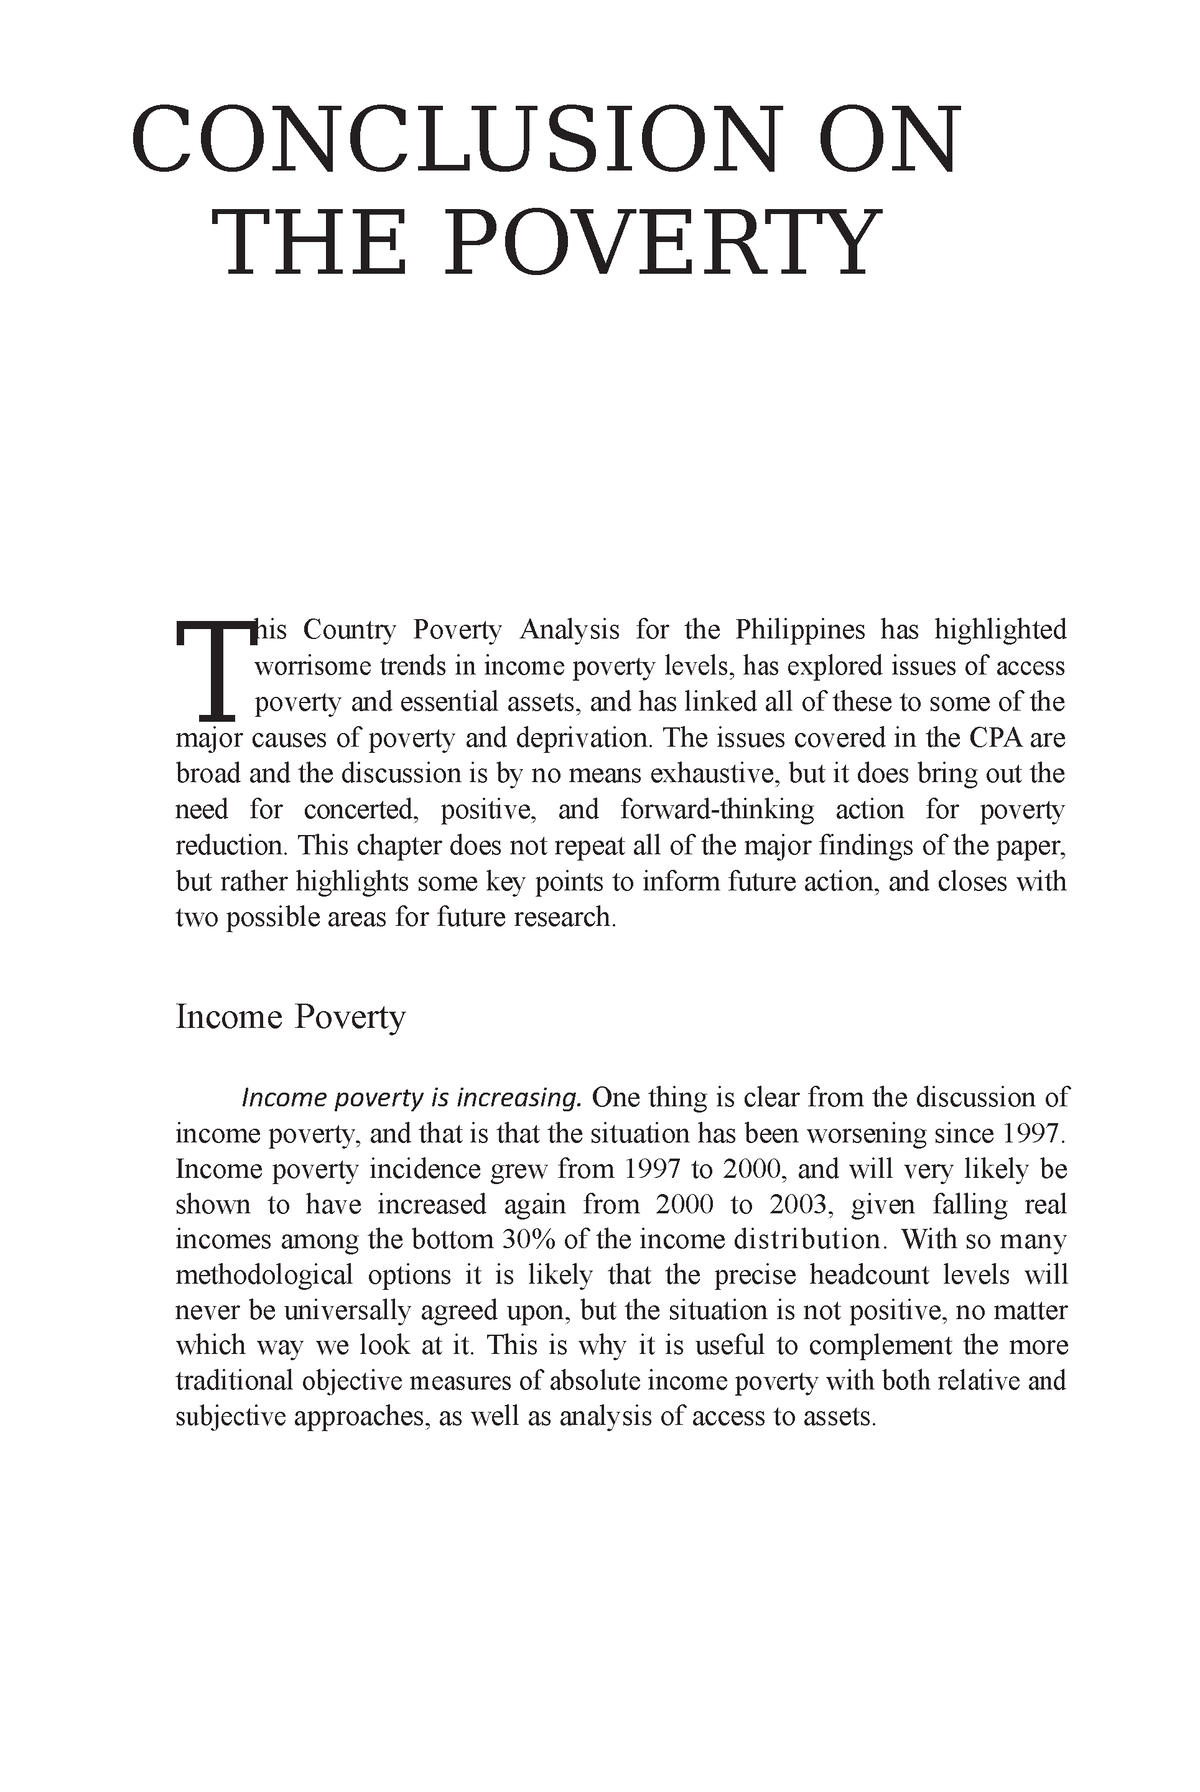 thesis statements for poverty